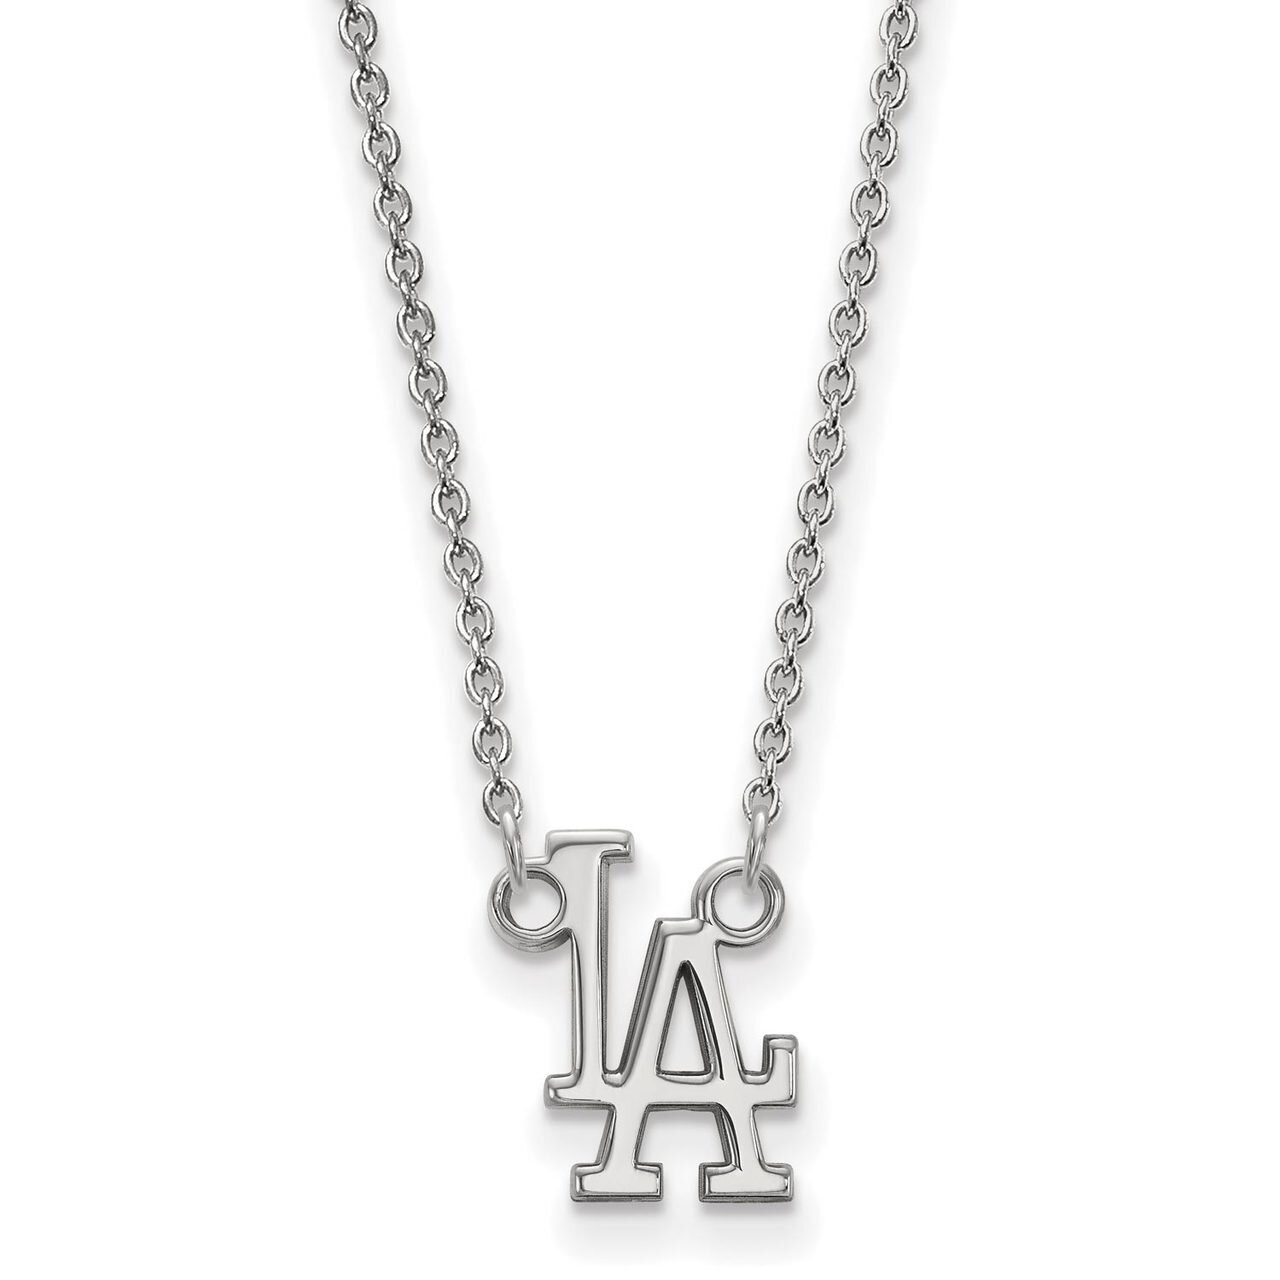 Los Angeles Dodgers Small Pendant with Chain Necklace 14k White Gold 4W008DOD-18